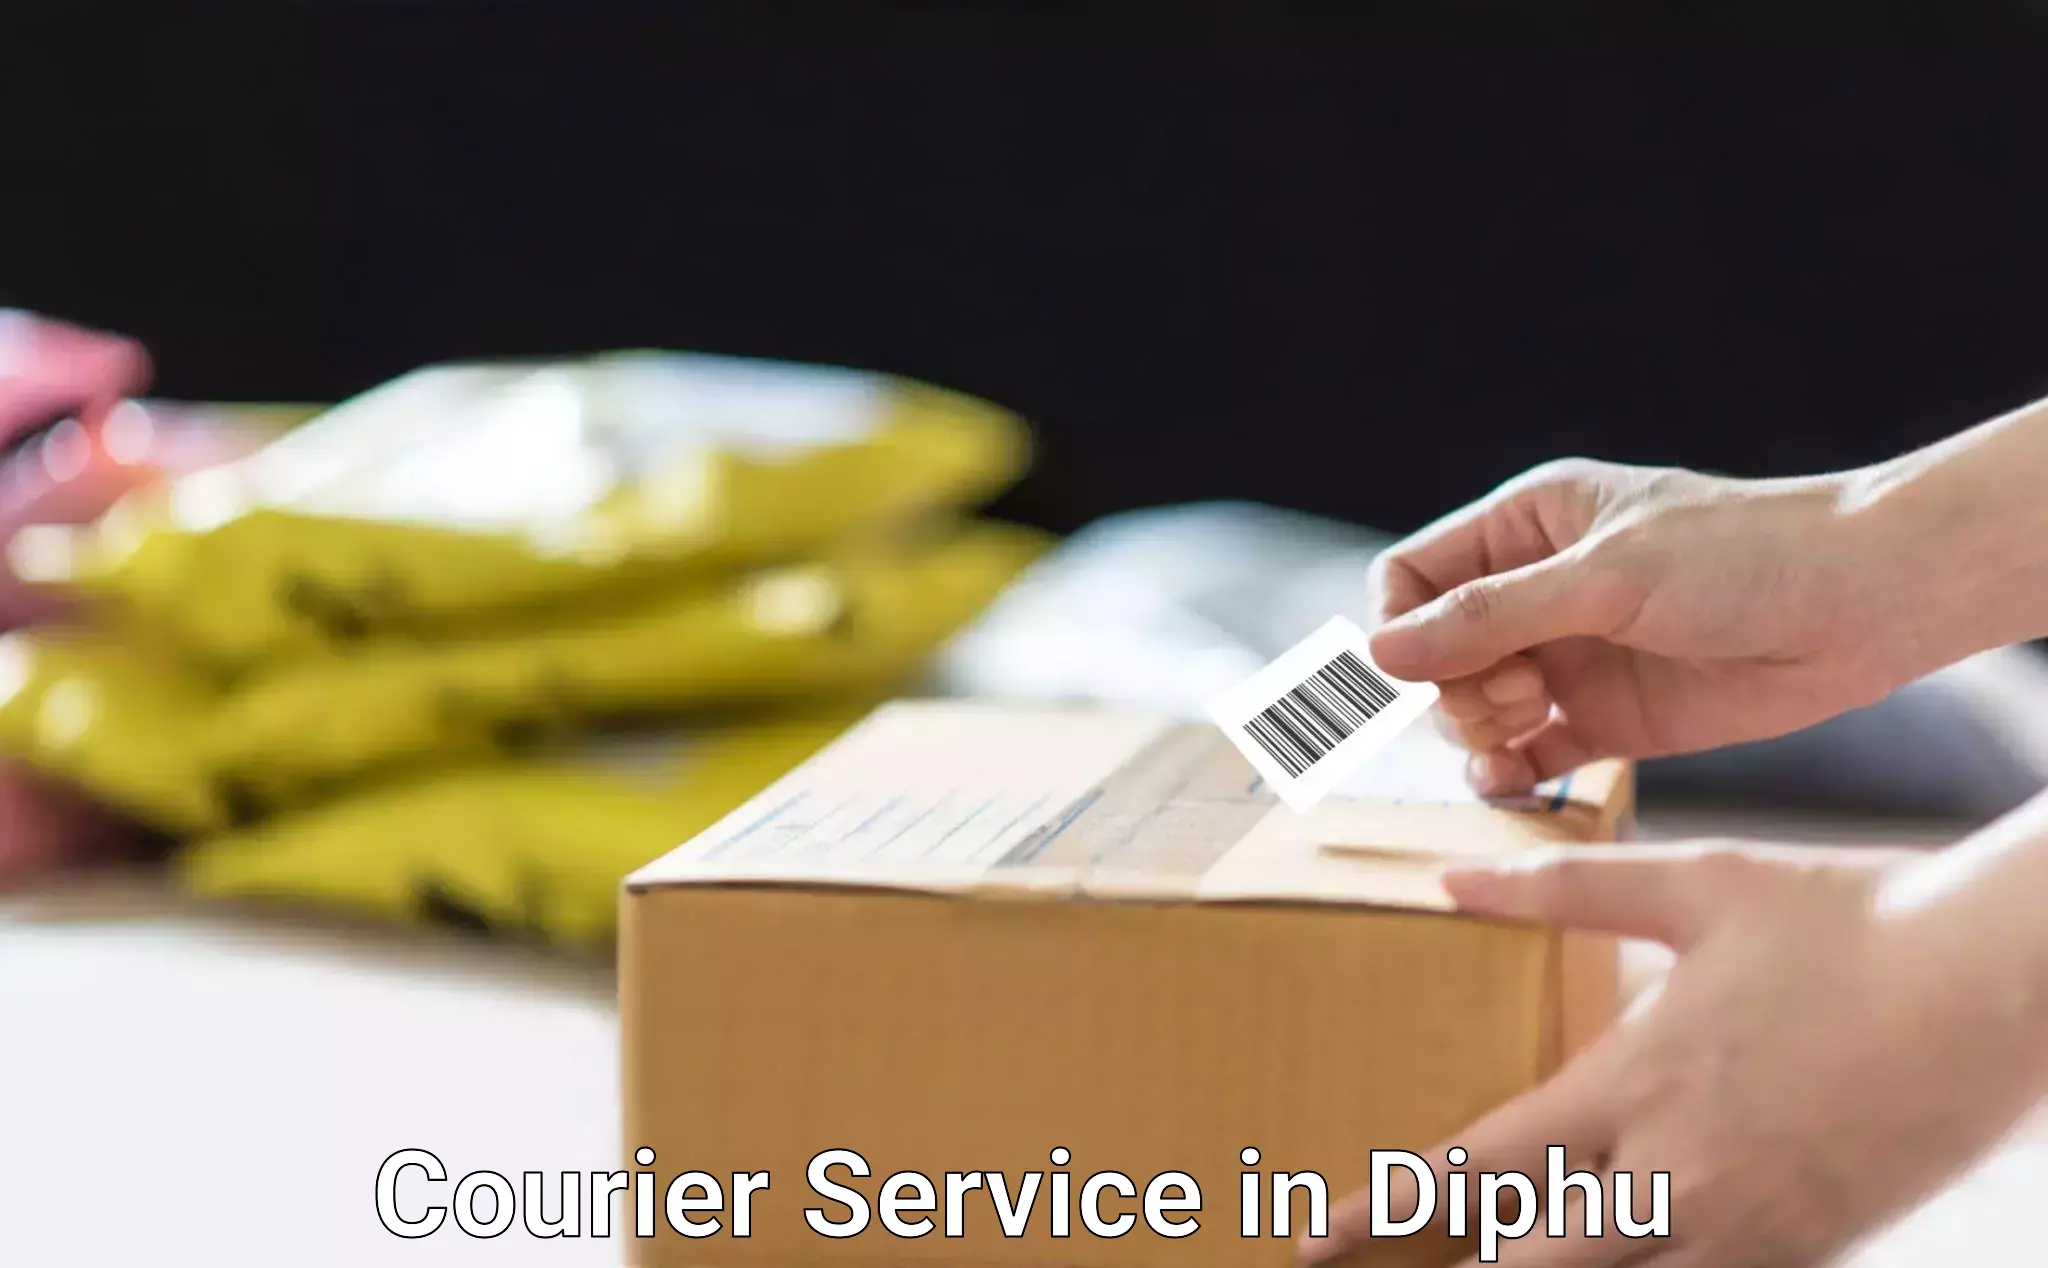 Emergency parcel delivery in Diphu